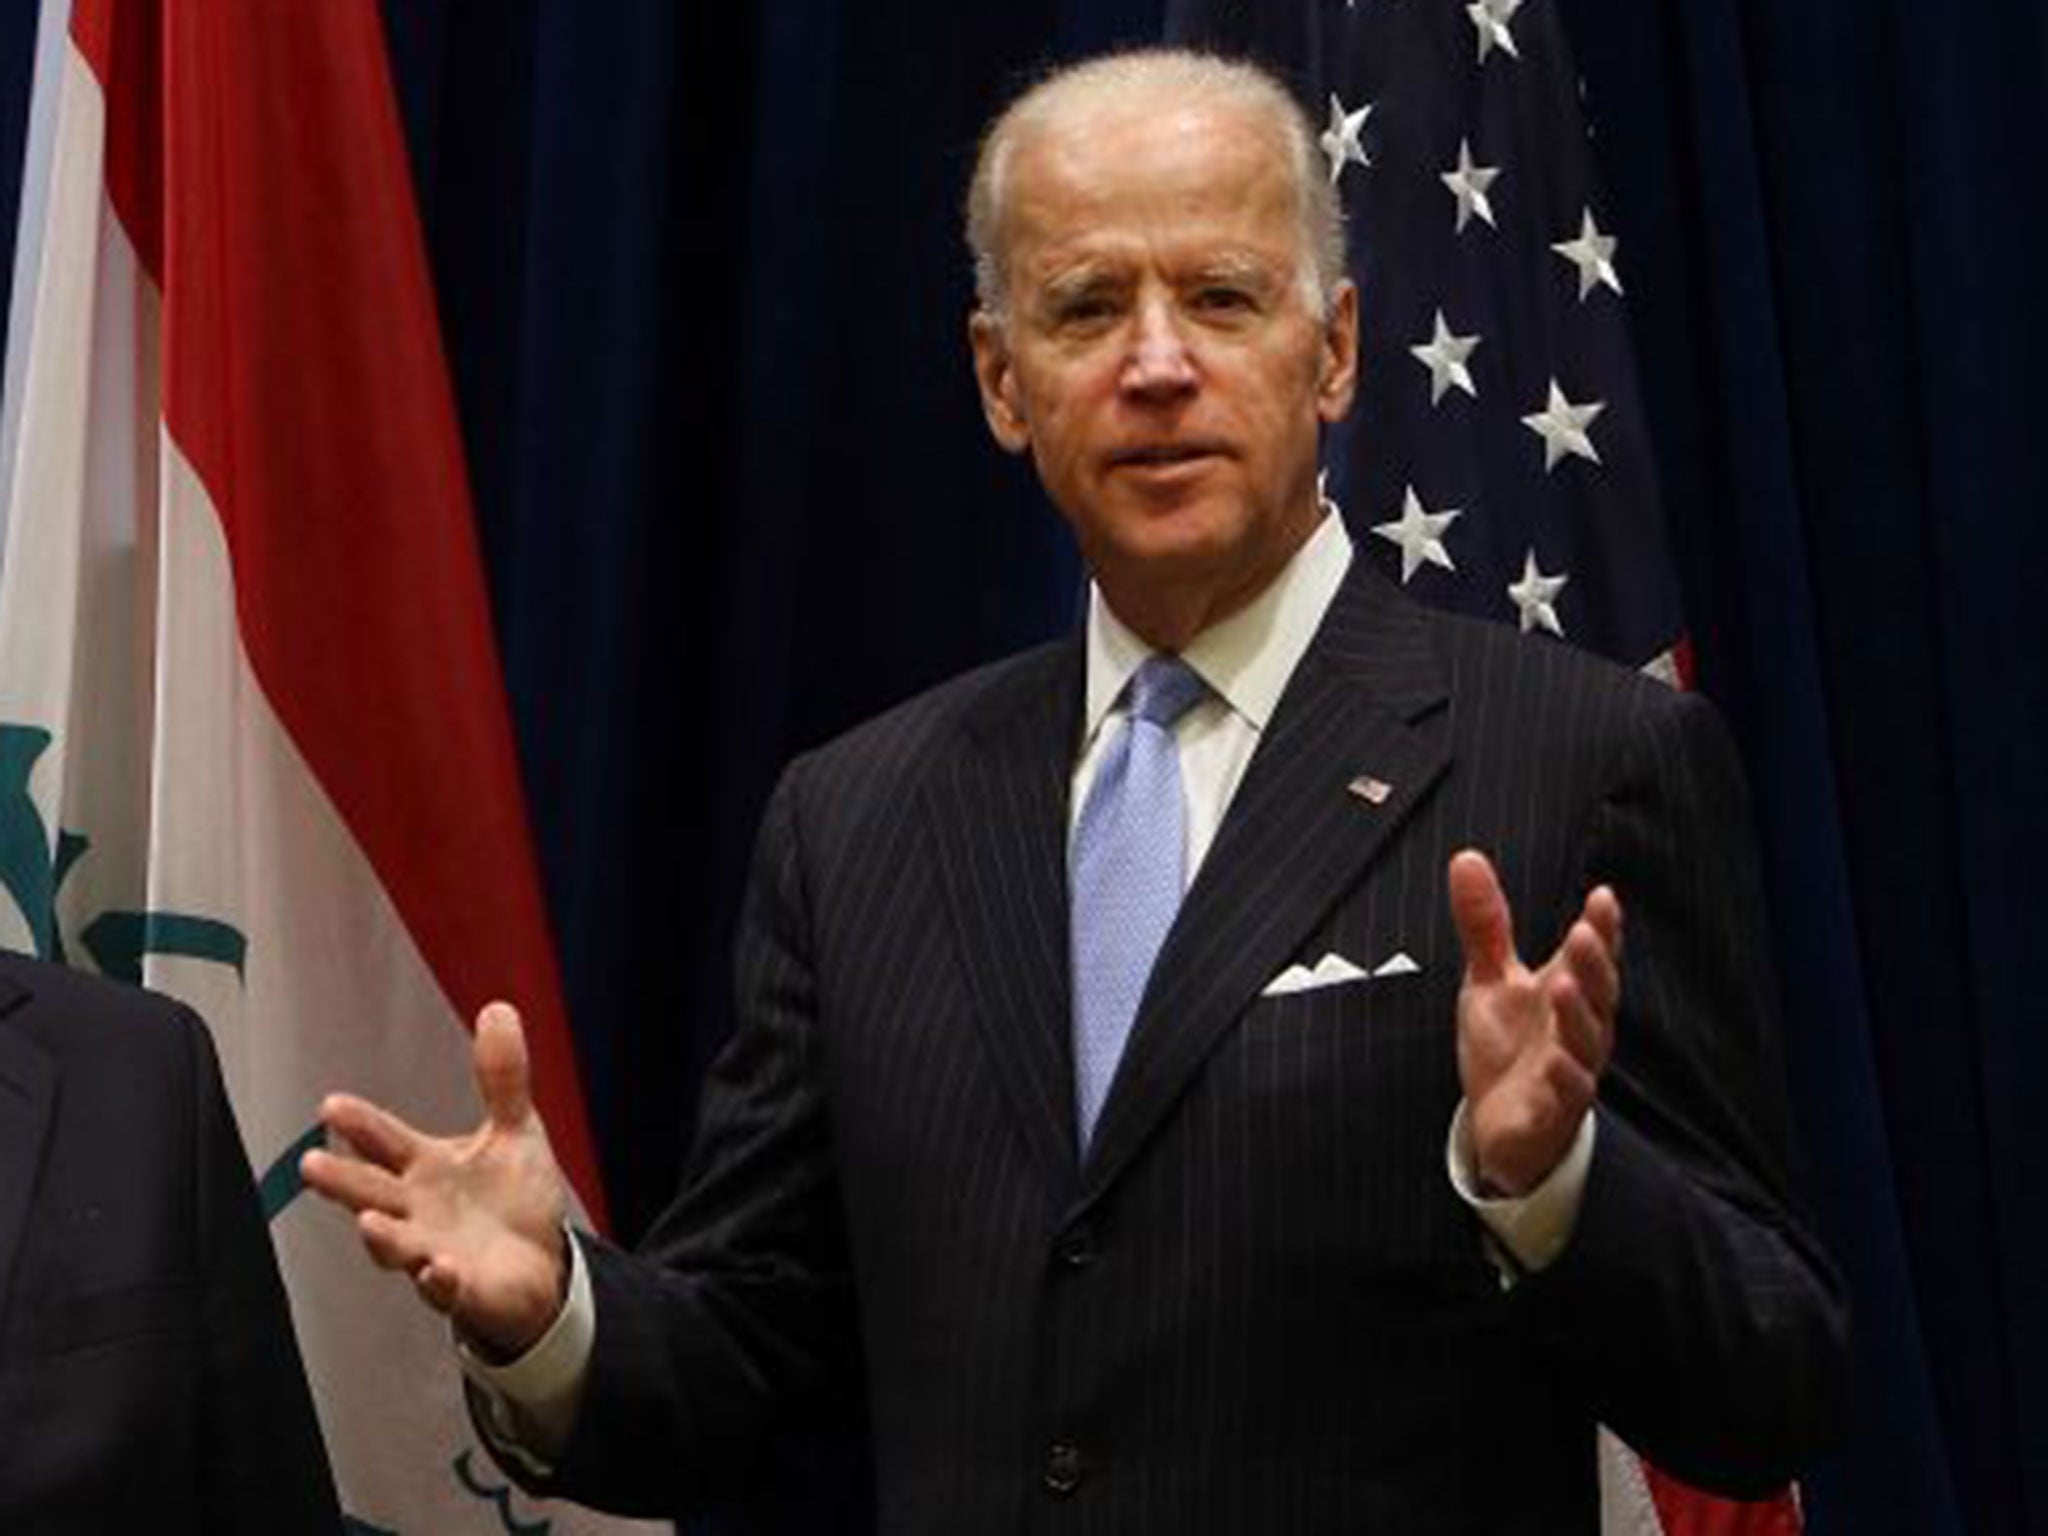 Biden faces pressure to move leftwards from the progressive wing of his party